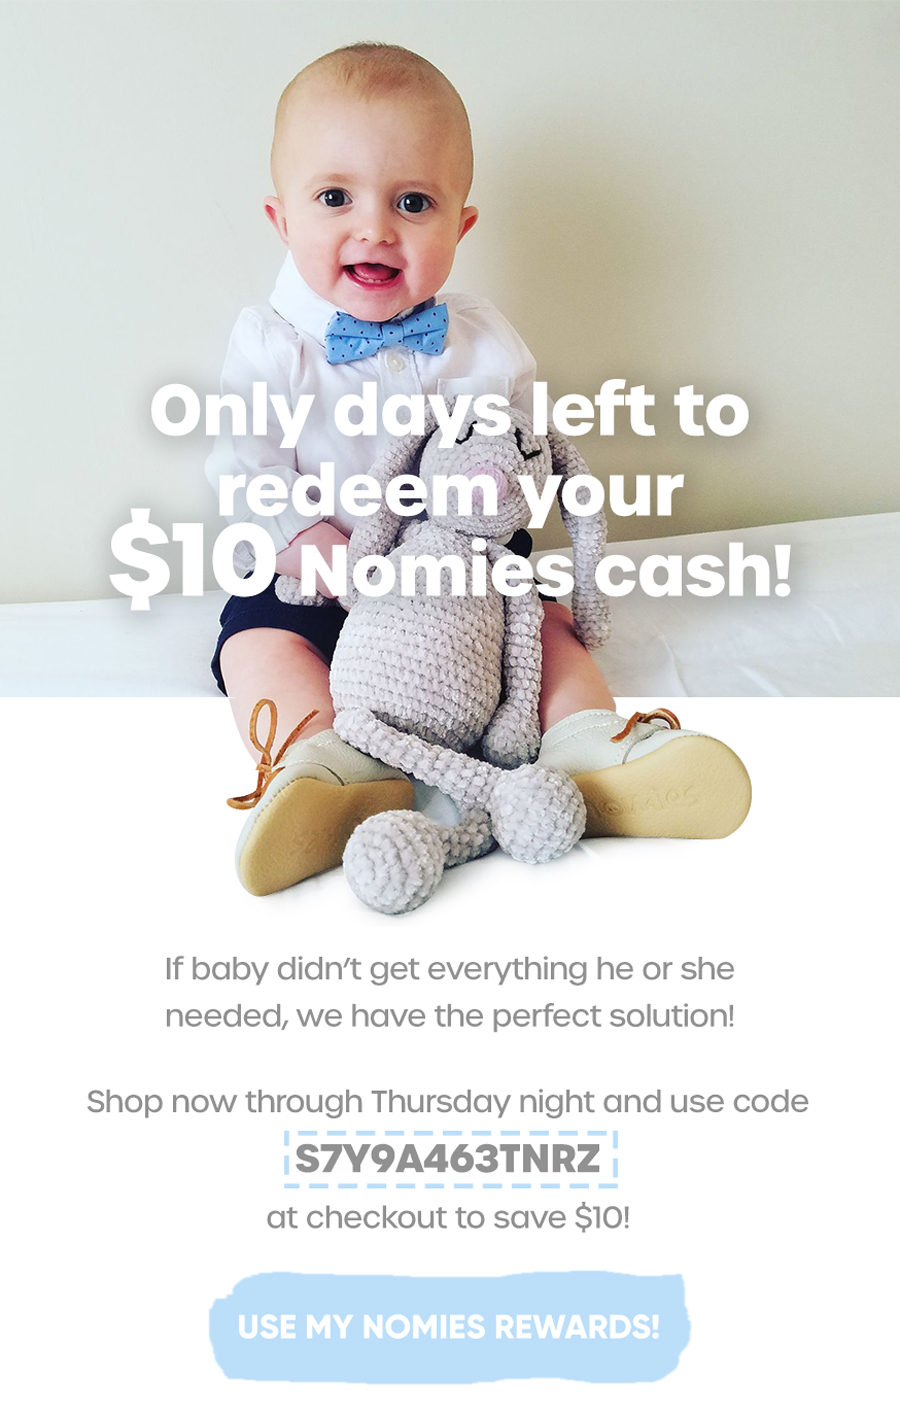 Only days left to redeem your $10 Nomies cash!